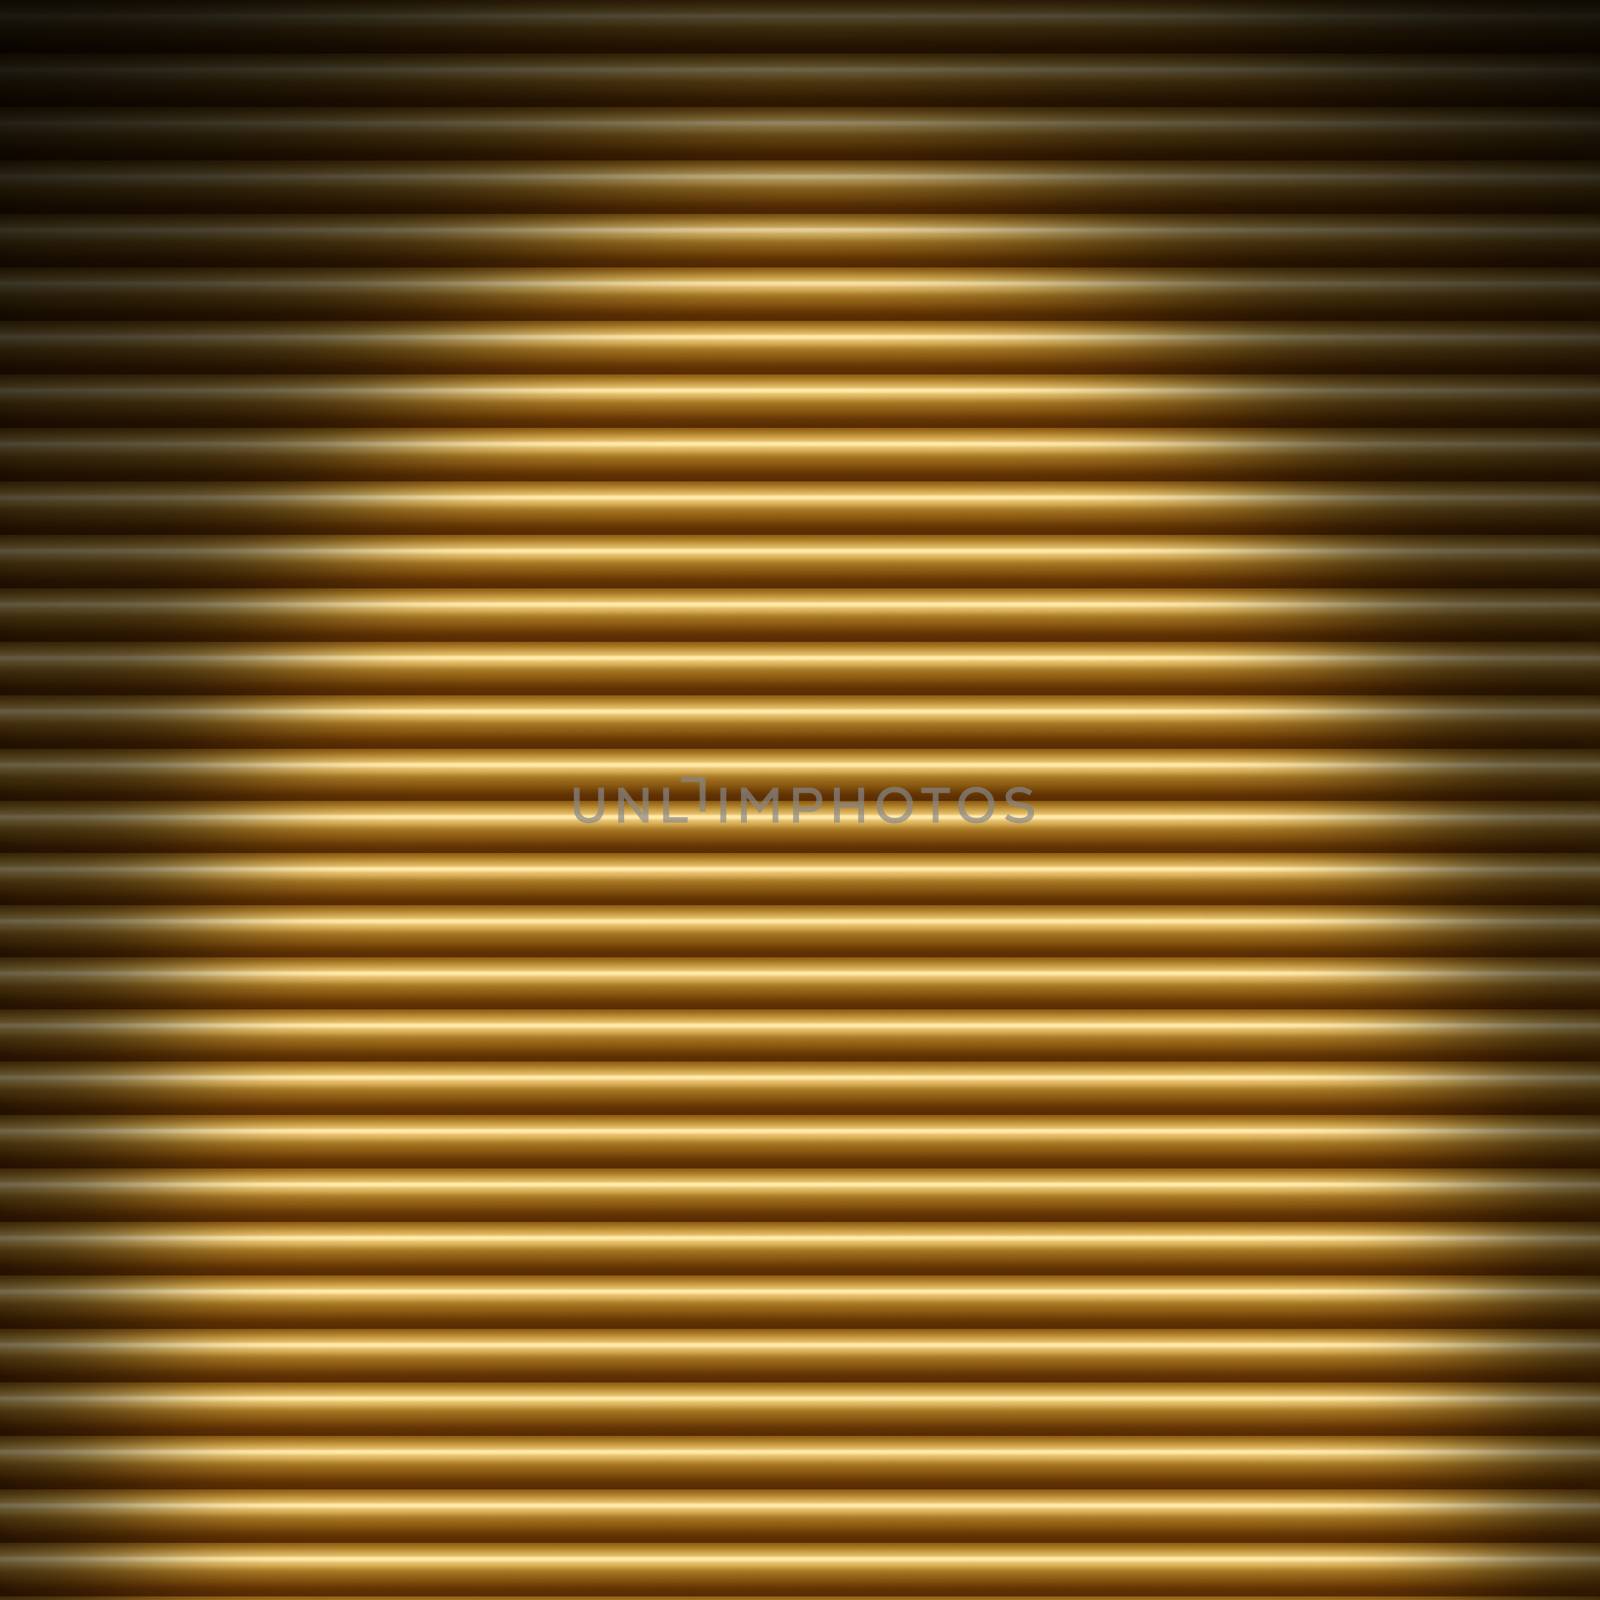 Horizontal gold tube background lit from overhead by Balefire9